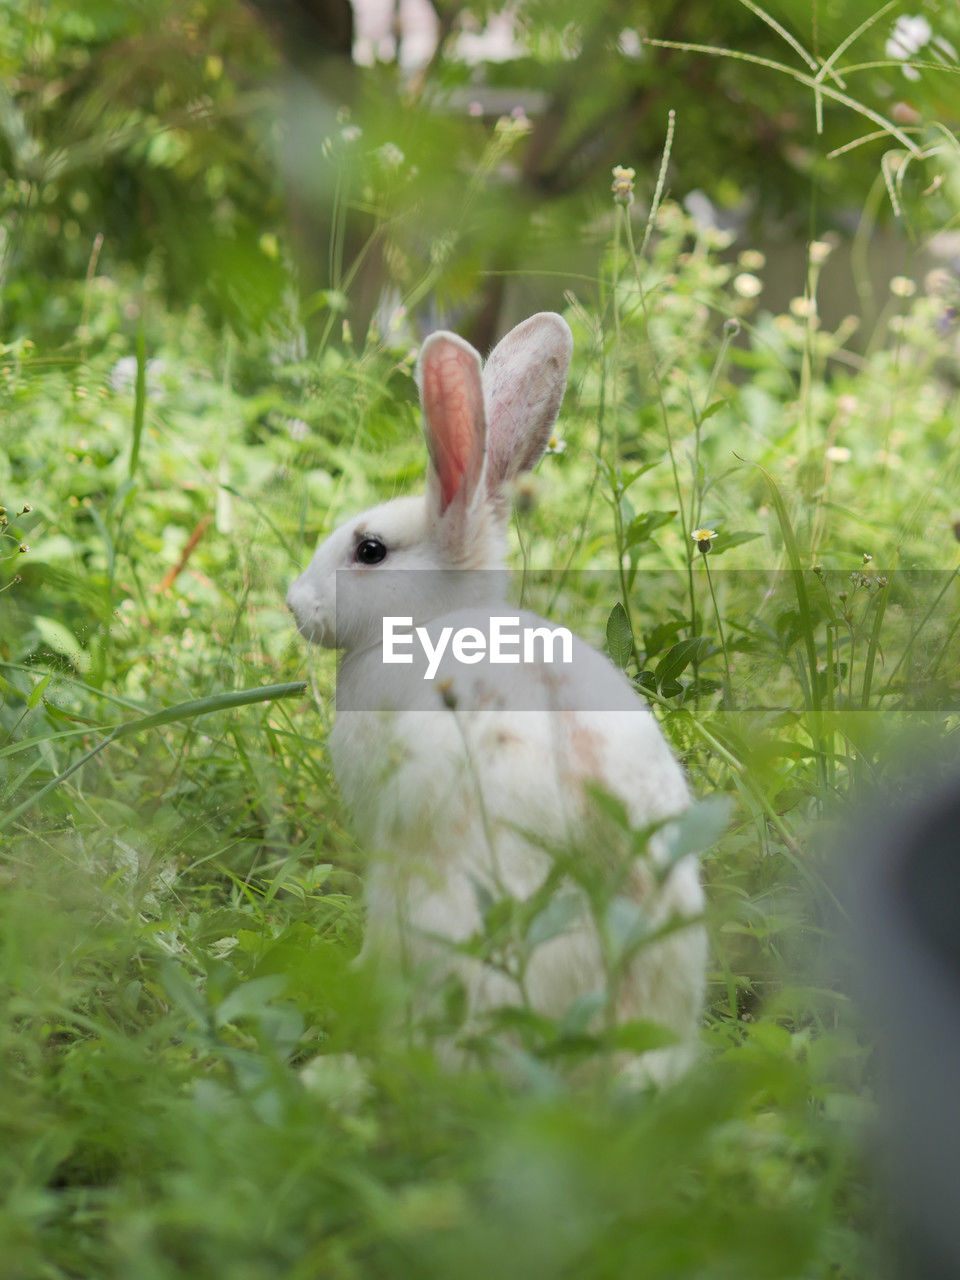 animal, animal themes, pet, mammal, rabbit, grass, rabbits and hares, domestic rabbit, plant, one animal, animal wildlife, selective focus, hare, nature, no people, domestic animals, easter, wildlife, land, animal body part, green, flower, close-up, outdoors, day, meadow, easter bunny, field, portrait, cute